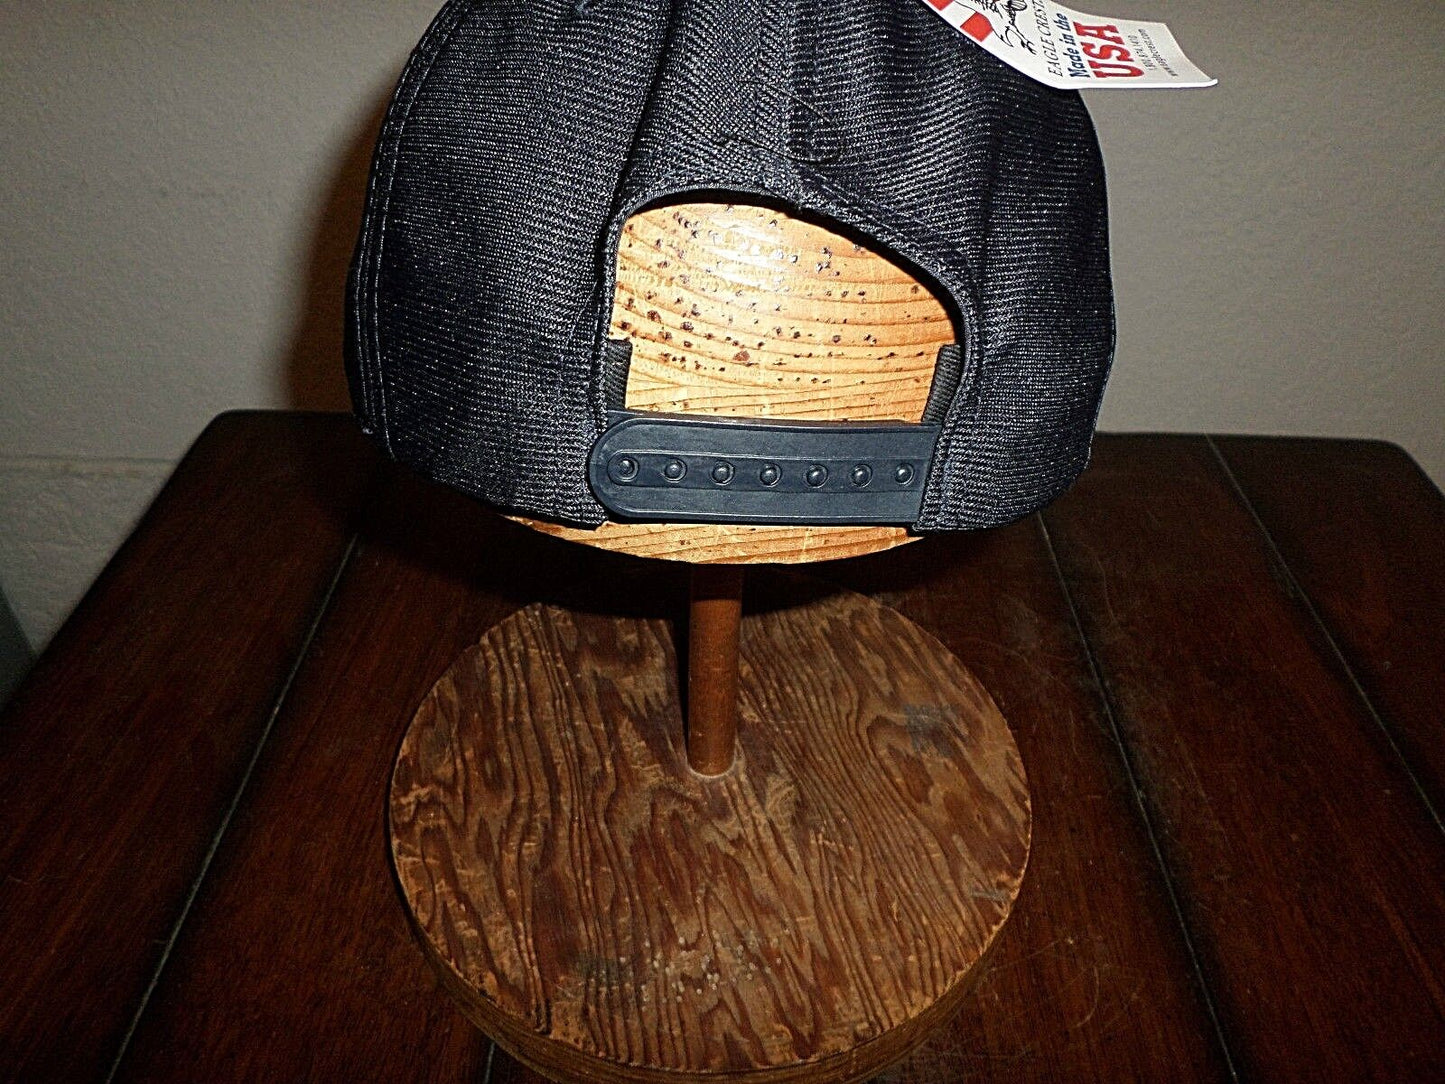 USS GRAVELY DDG-107 U.S NAVY SHIP HAT U.S MILITARY OFFICIAL BALL CAP U.S.A MADE